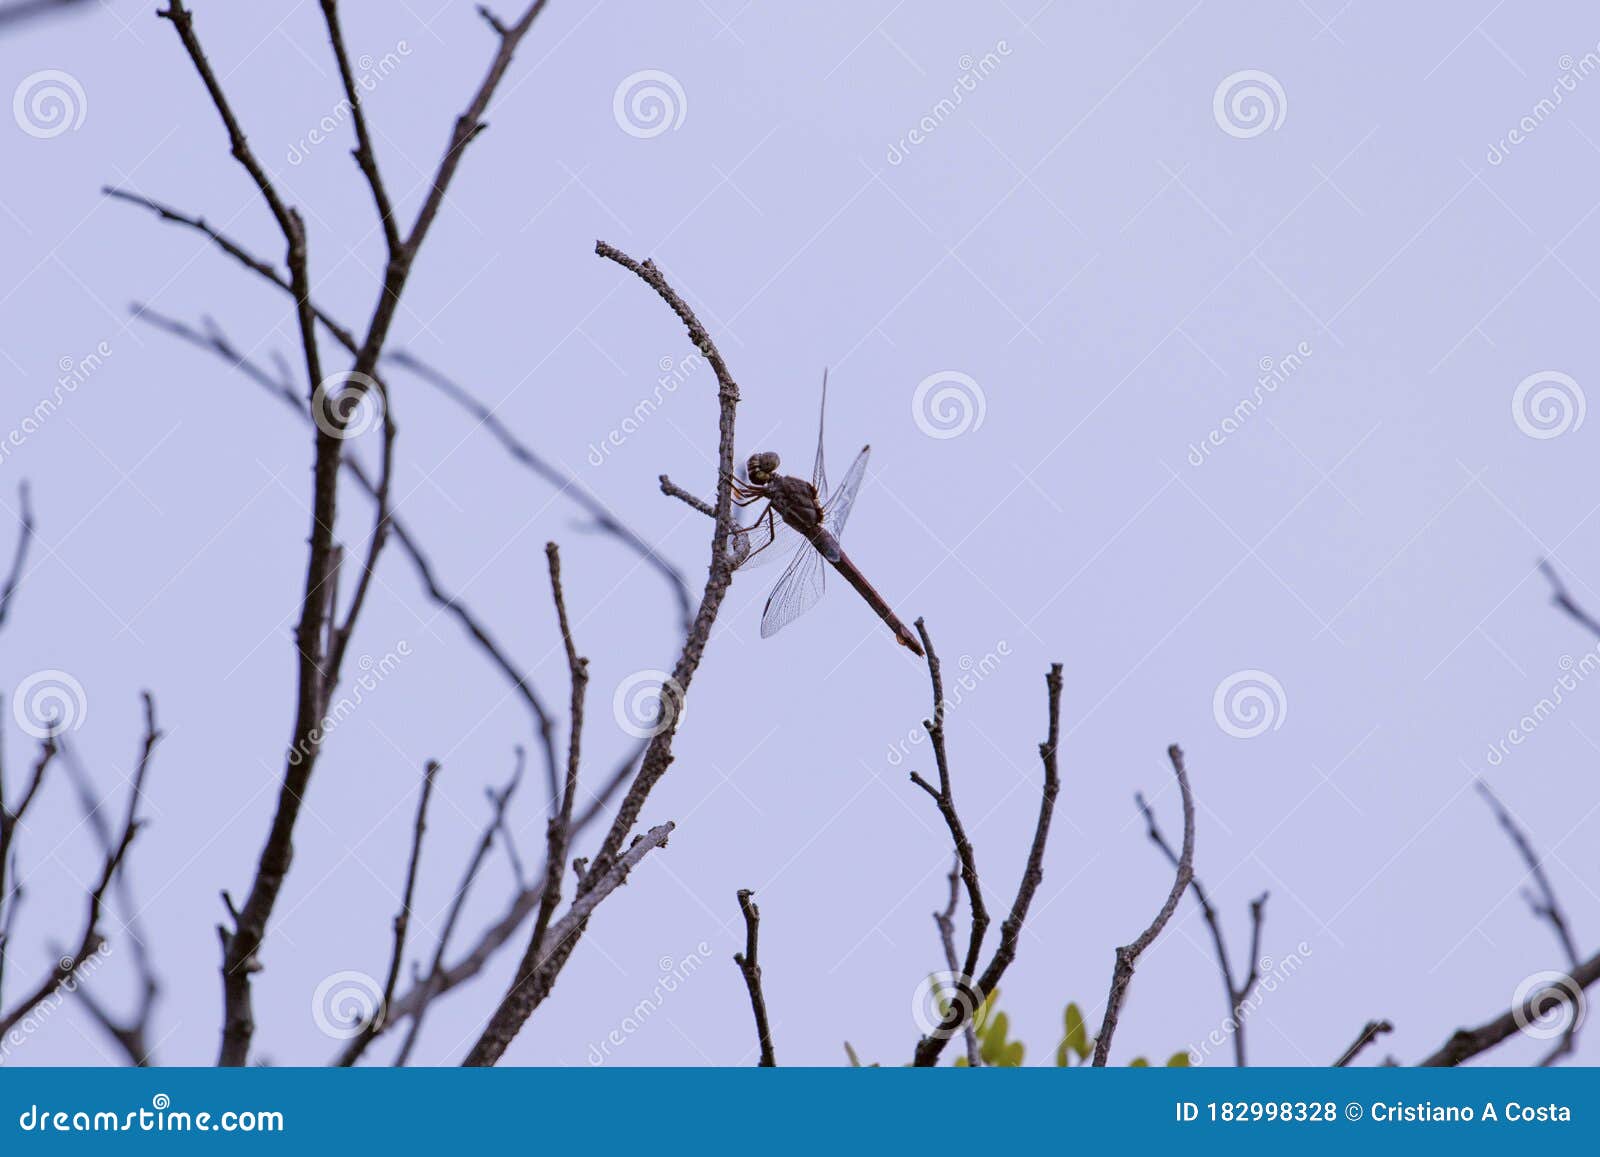 dragonfly perched on tree branch